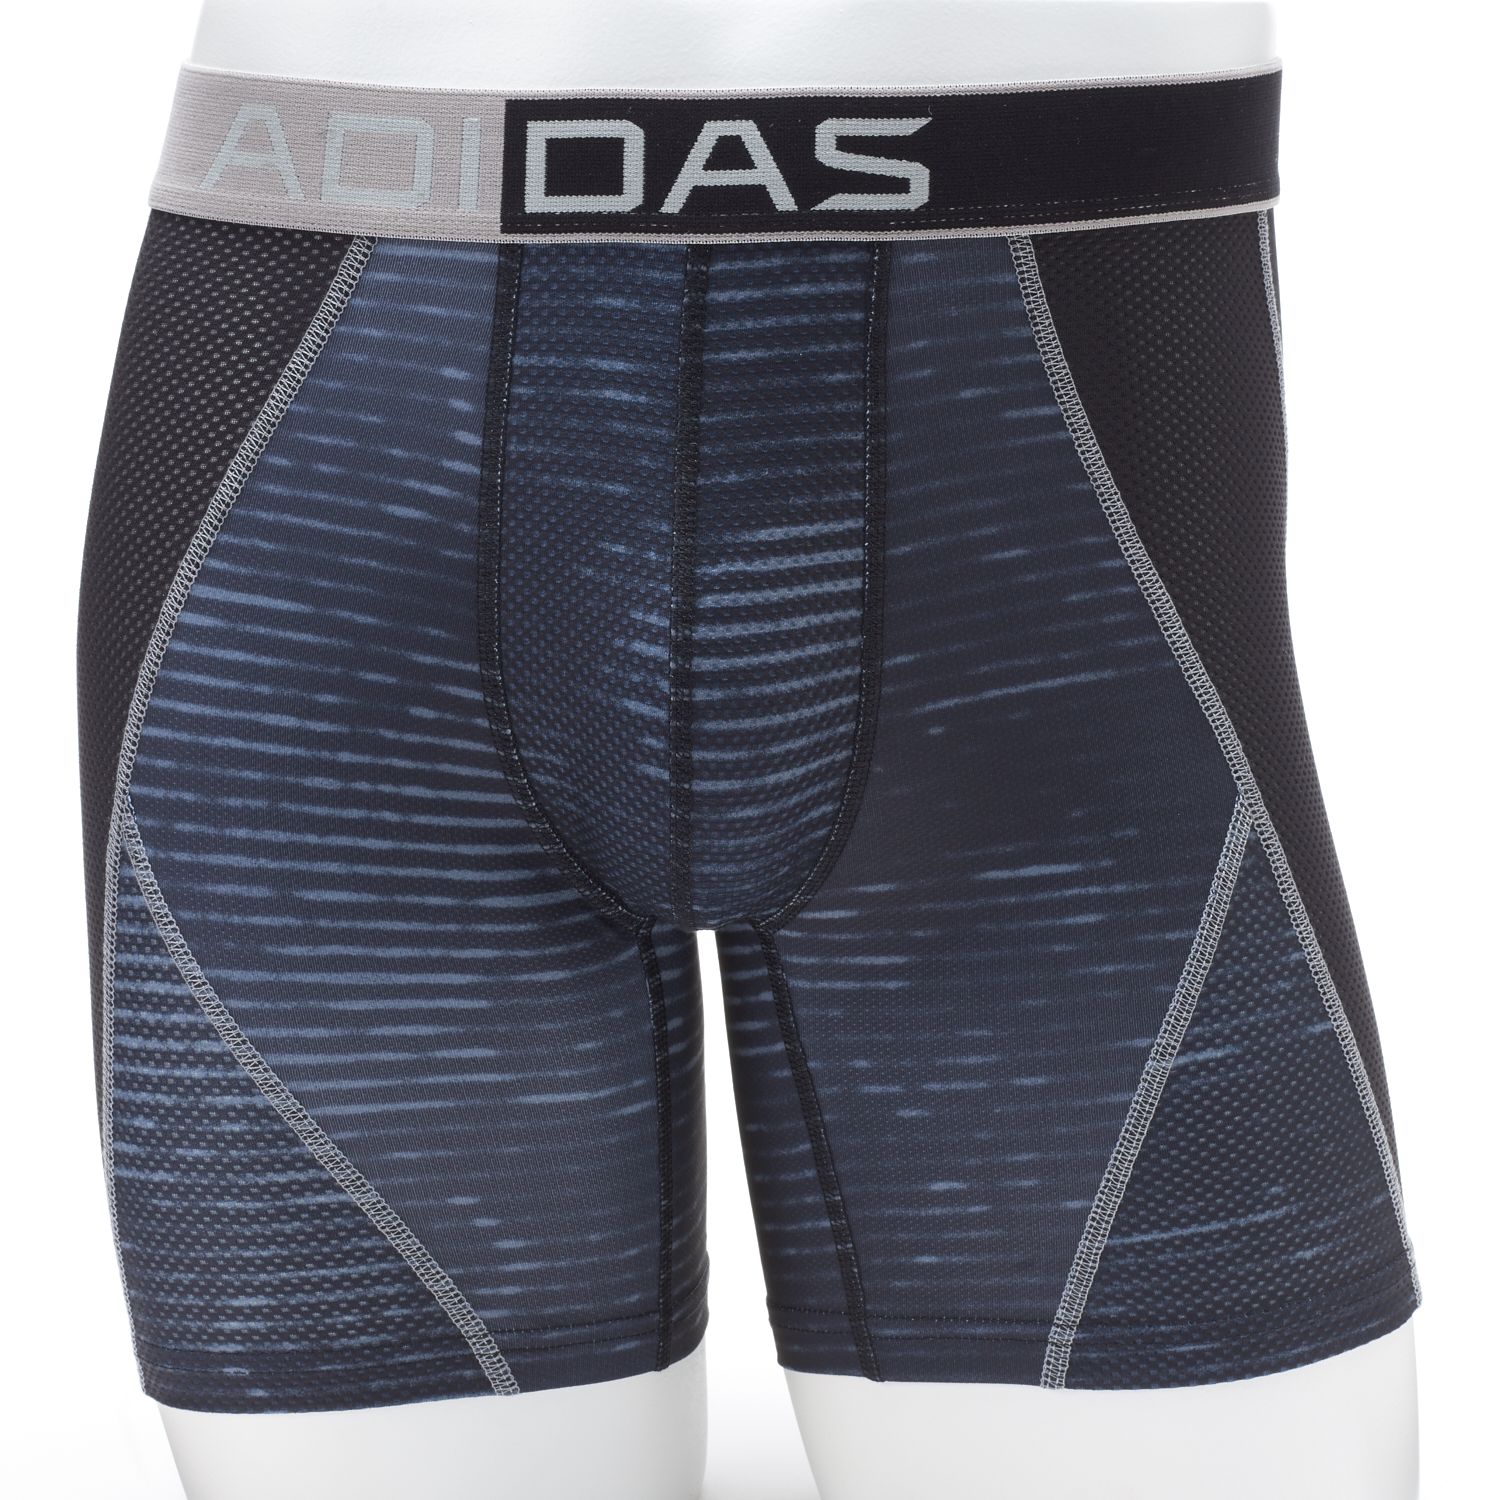 adidas stay cool boxer briefs